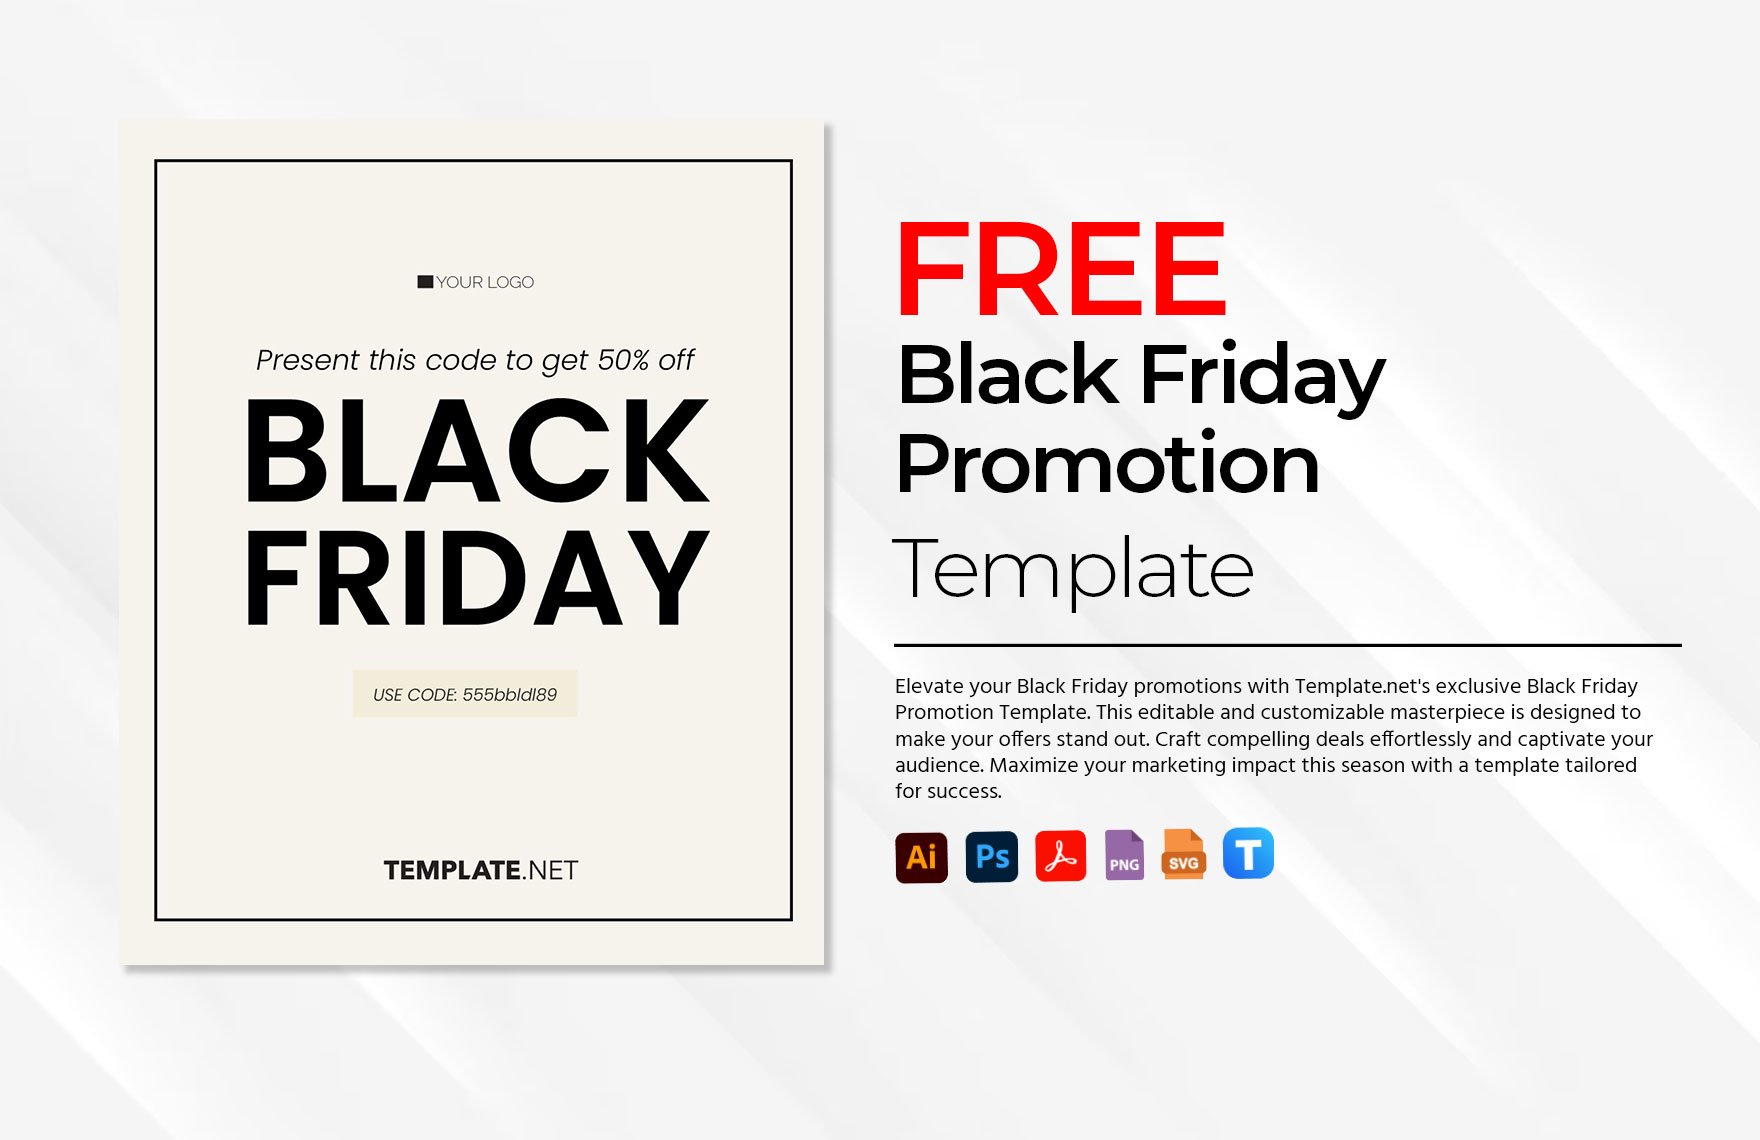 Black Friday Promotion Template